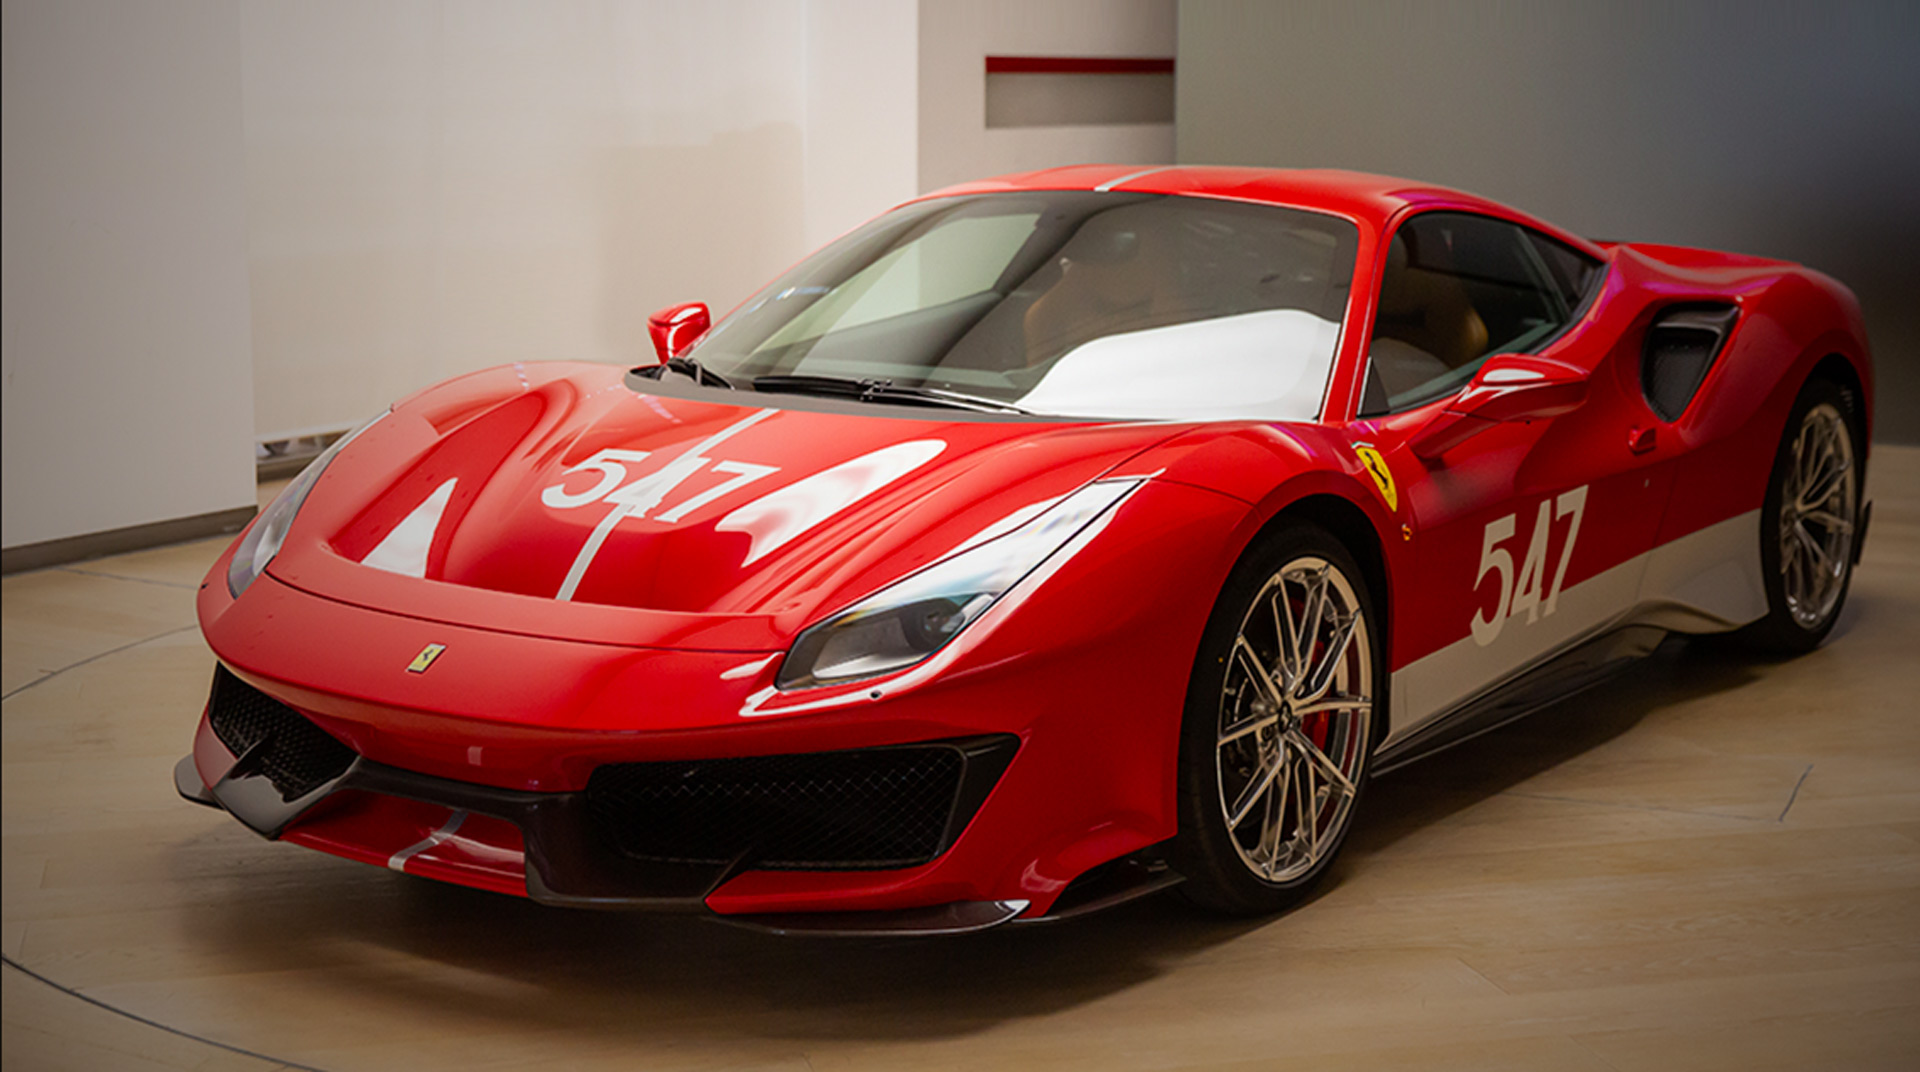 Ferrari shows off a 488 Pista customized by Tailor Made